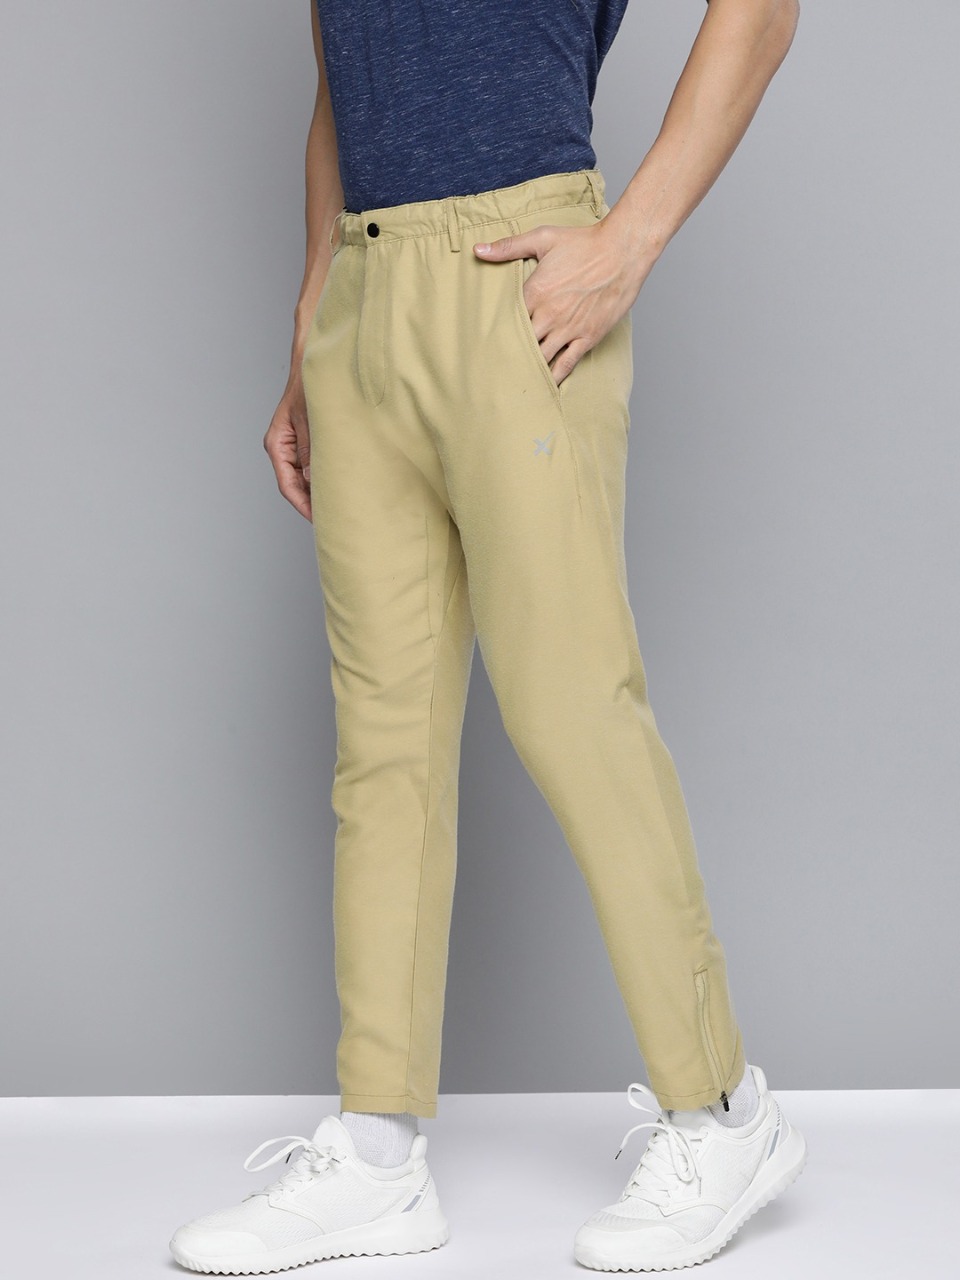 Hrx Trousers - Buy Hrx Trousers online in India